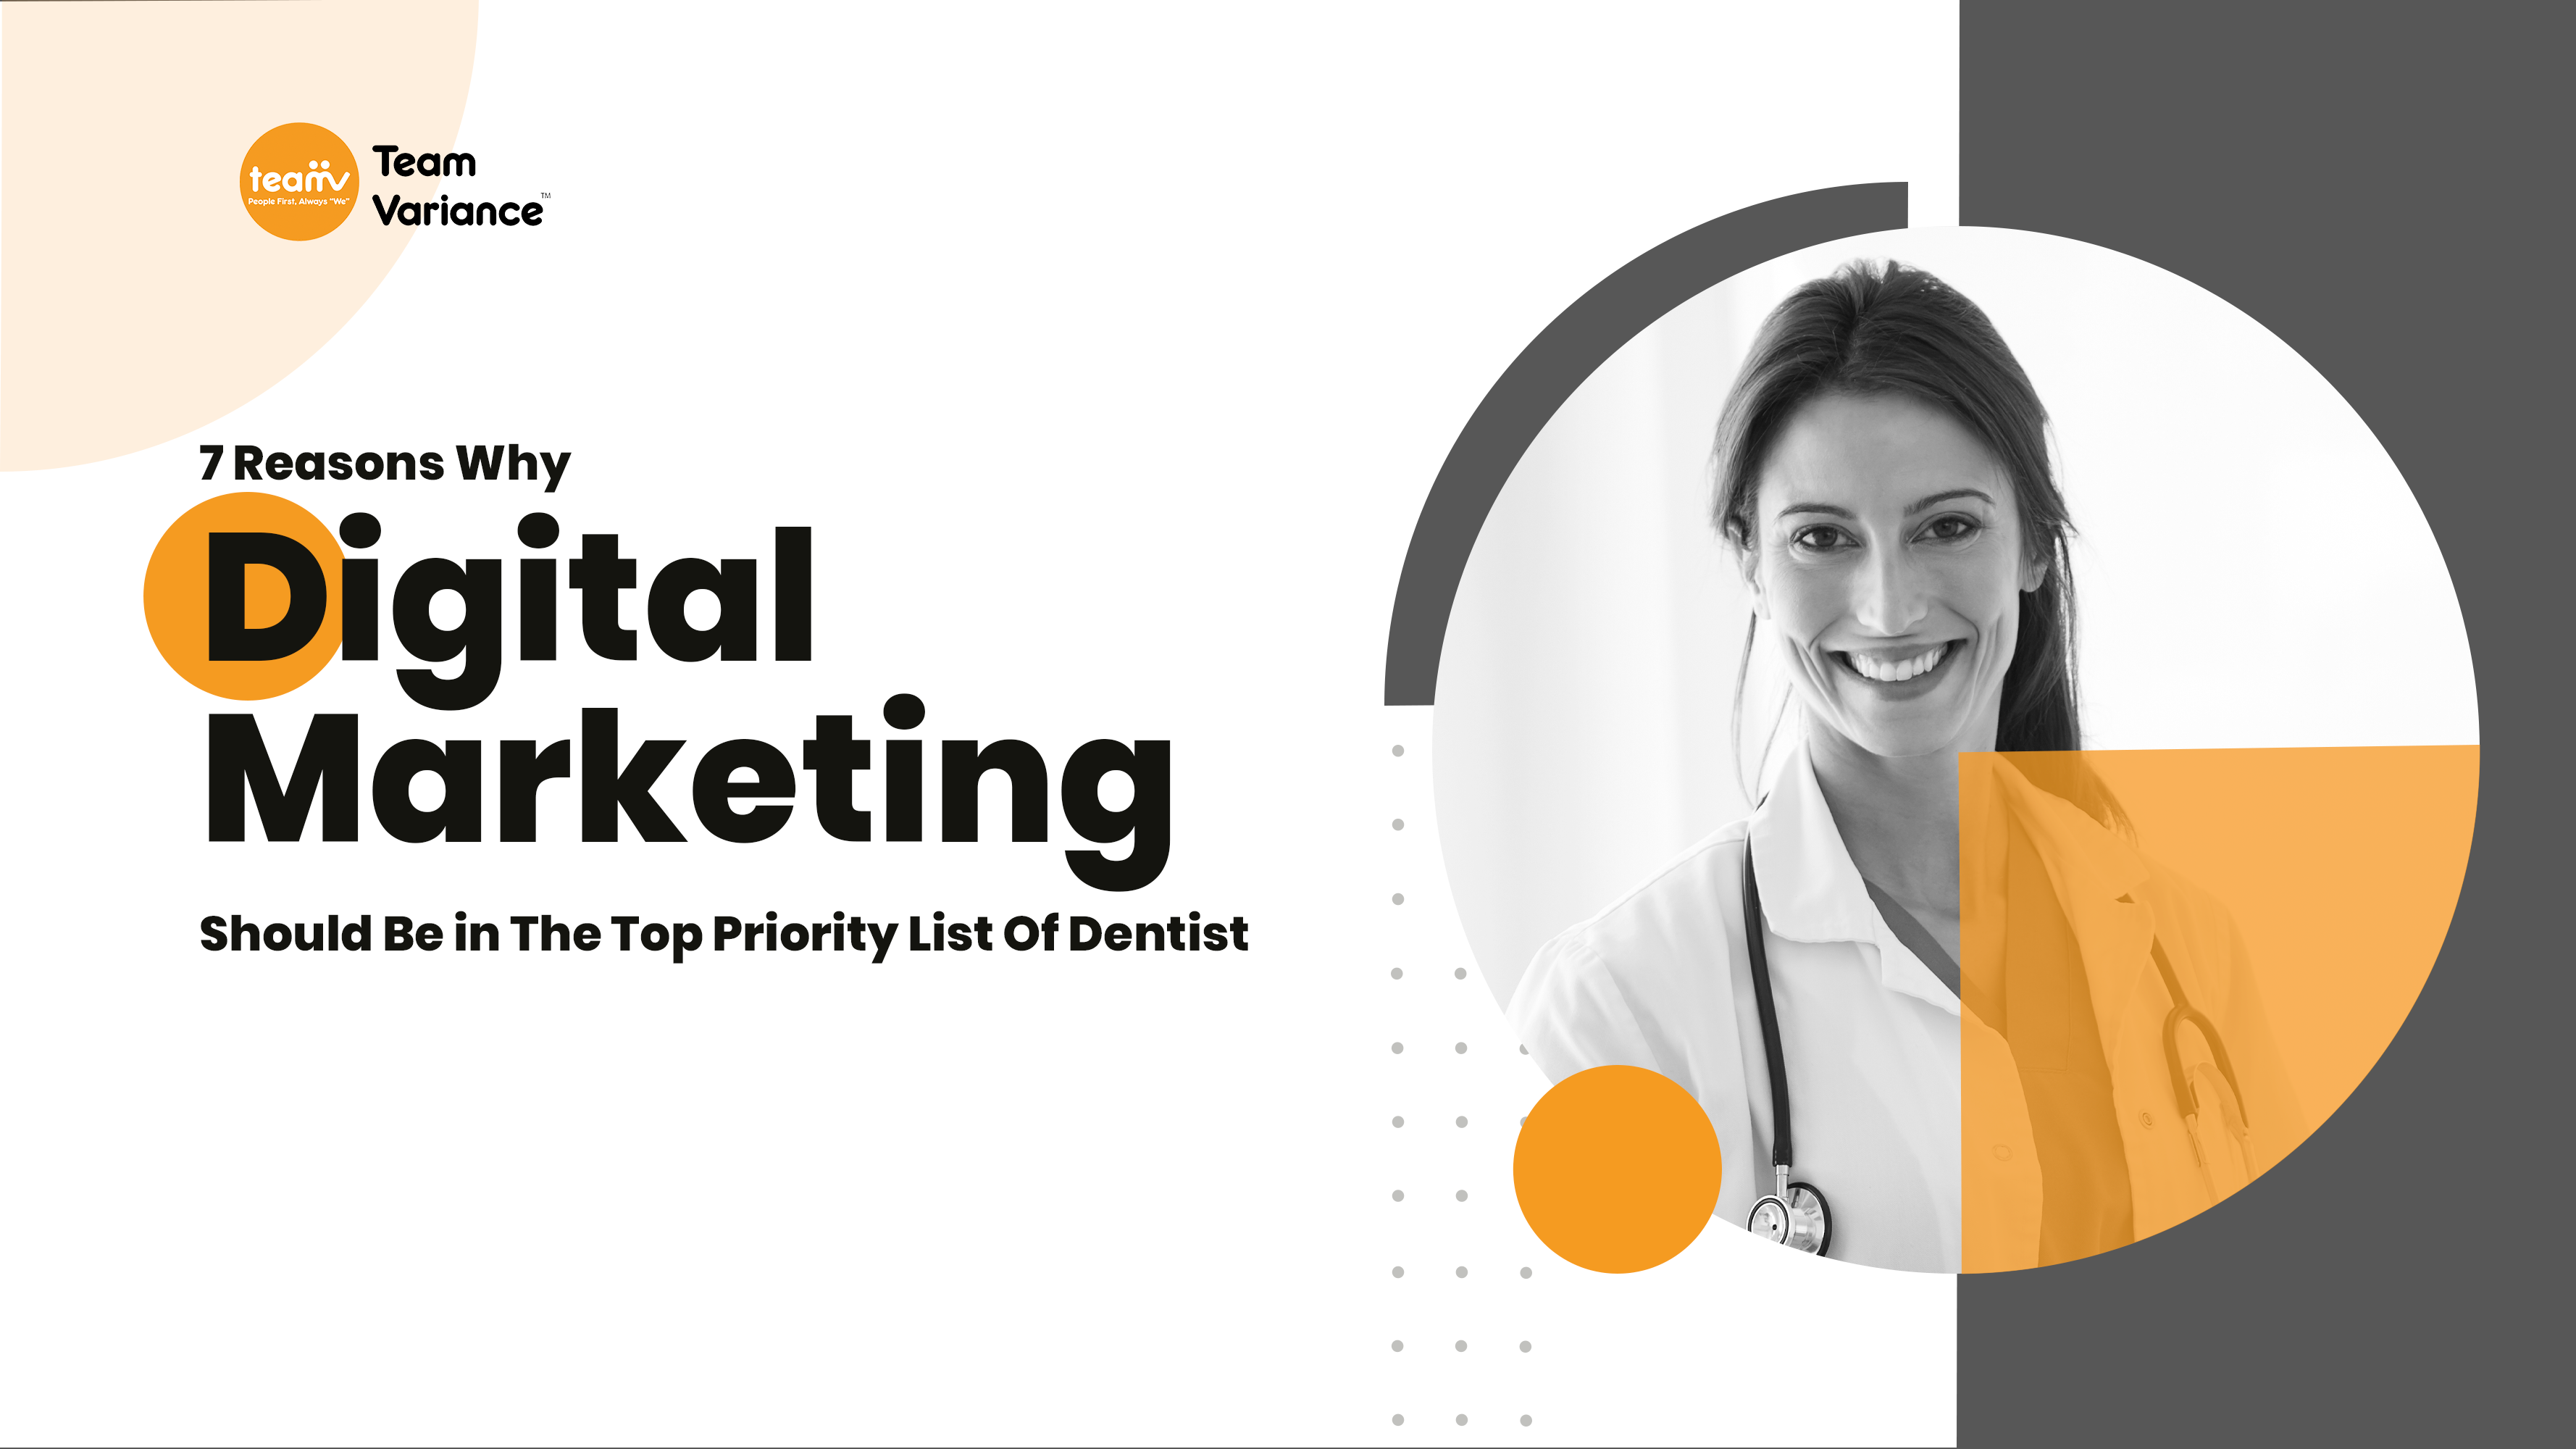 reasons-why-digital-marketing-should-be-in-the-top-priority-list-of-dentist